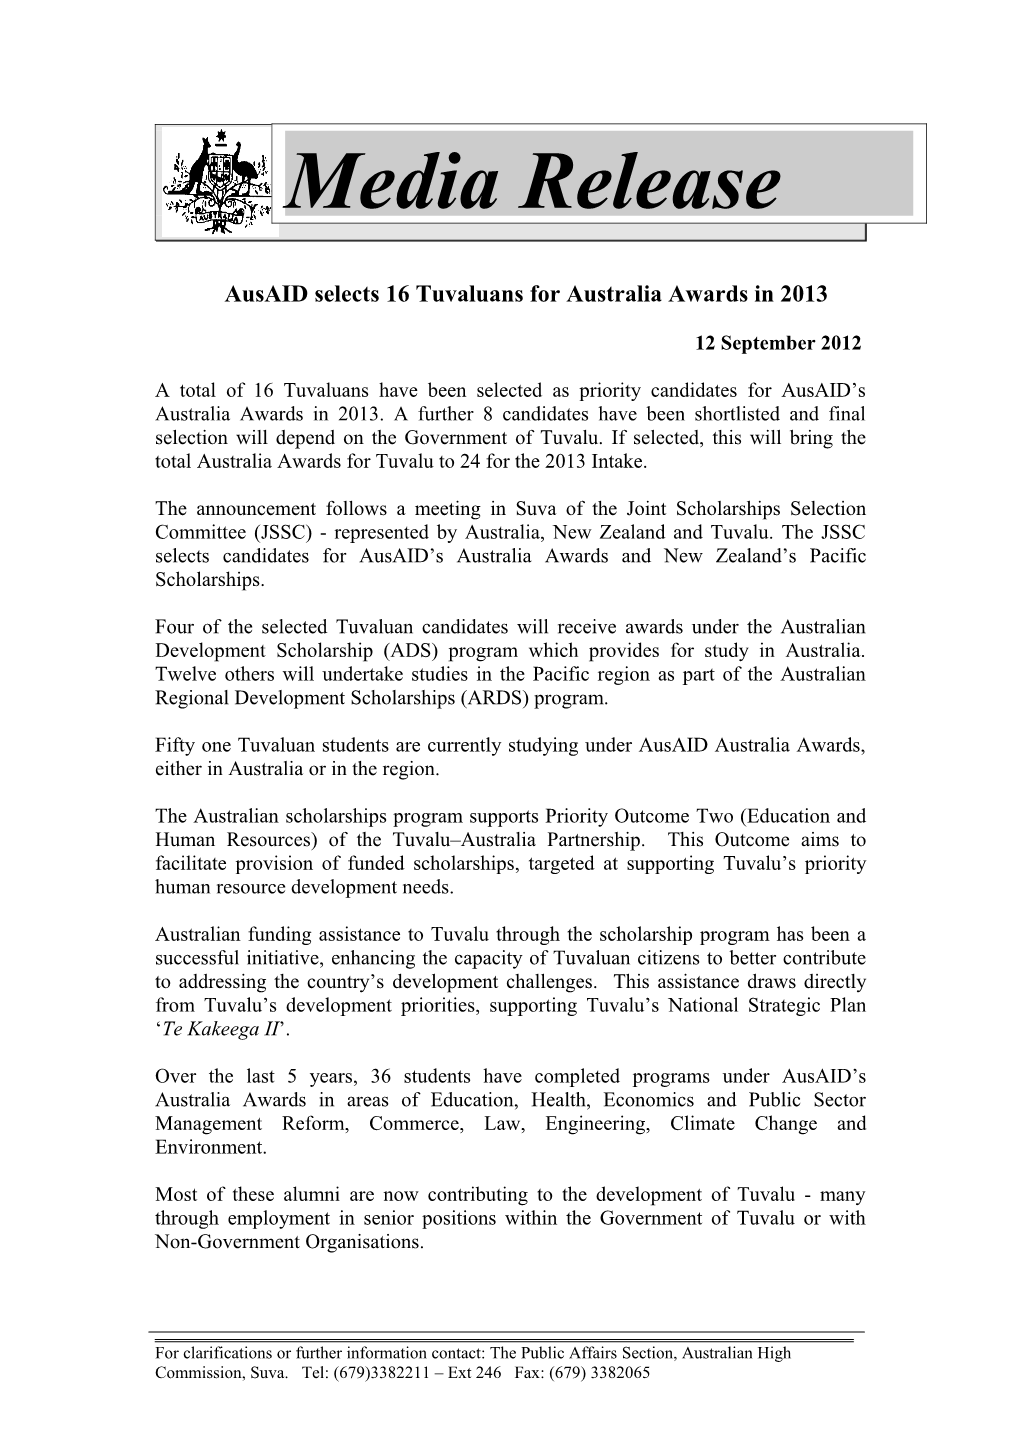 Ausaid Selects 16 Tuvaluans for Australia Awards in 2013